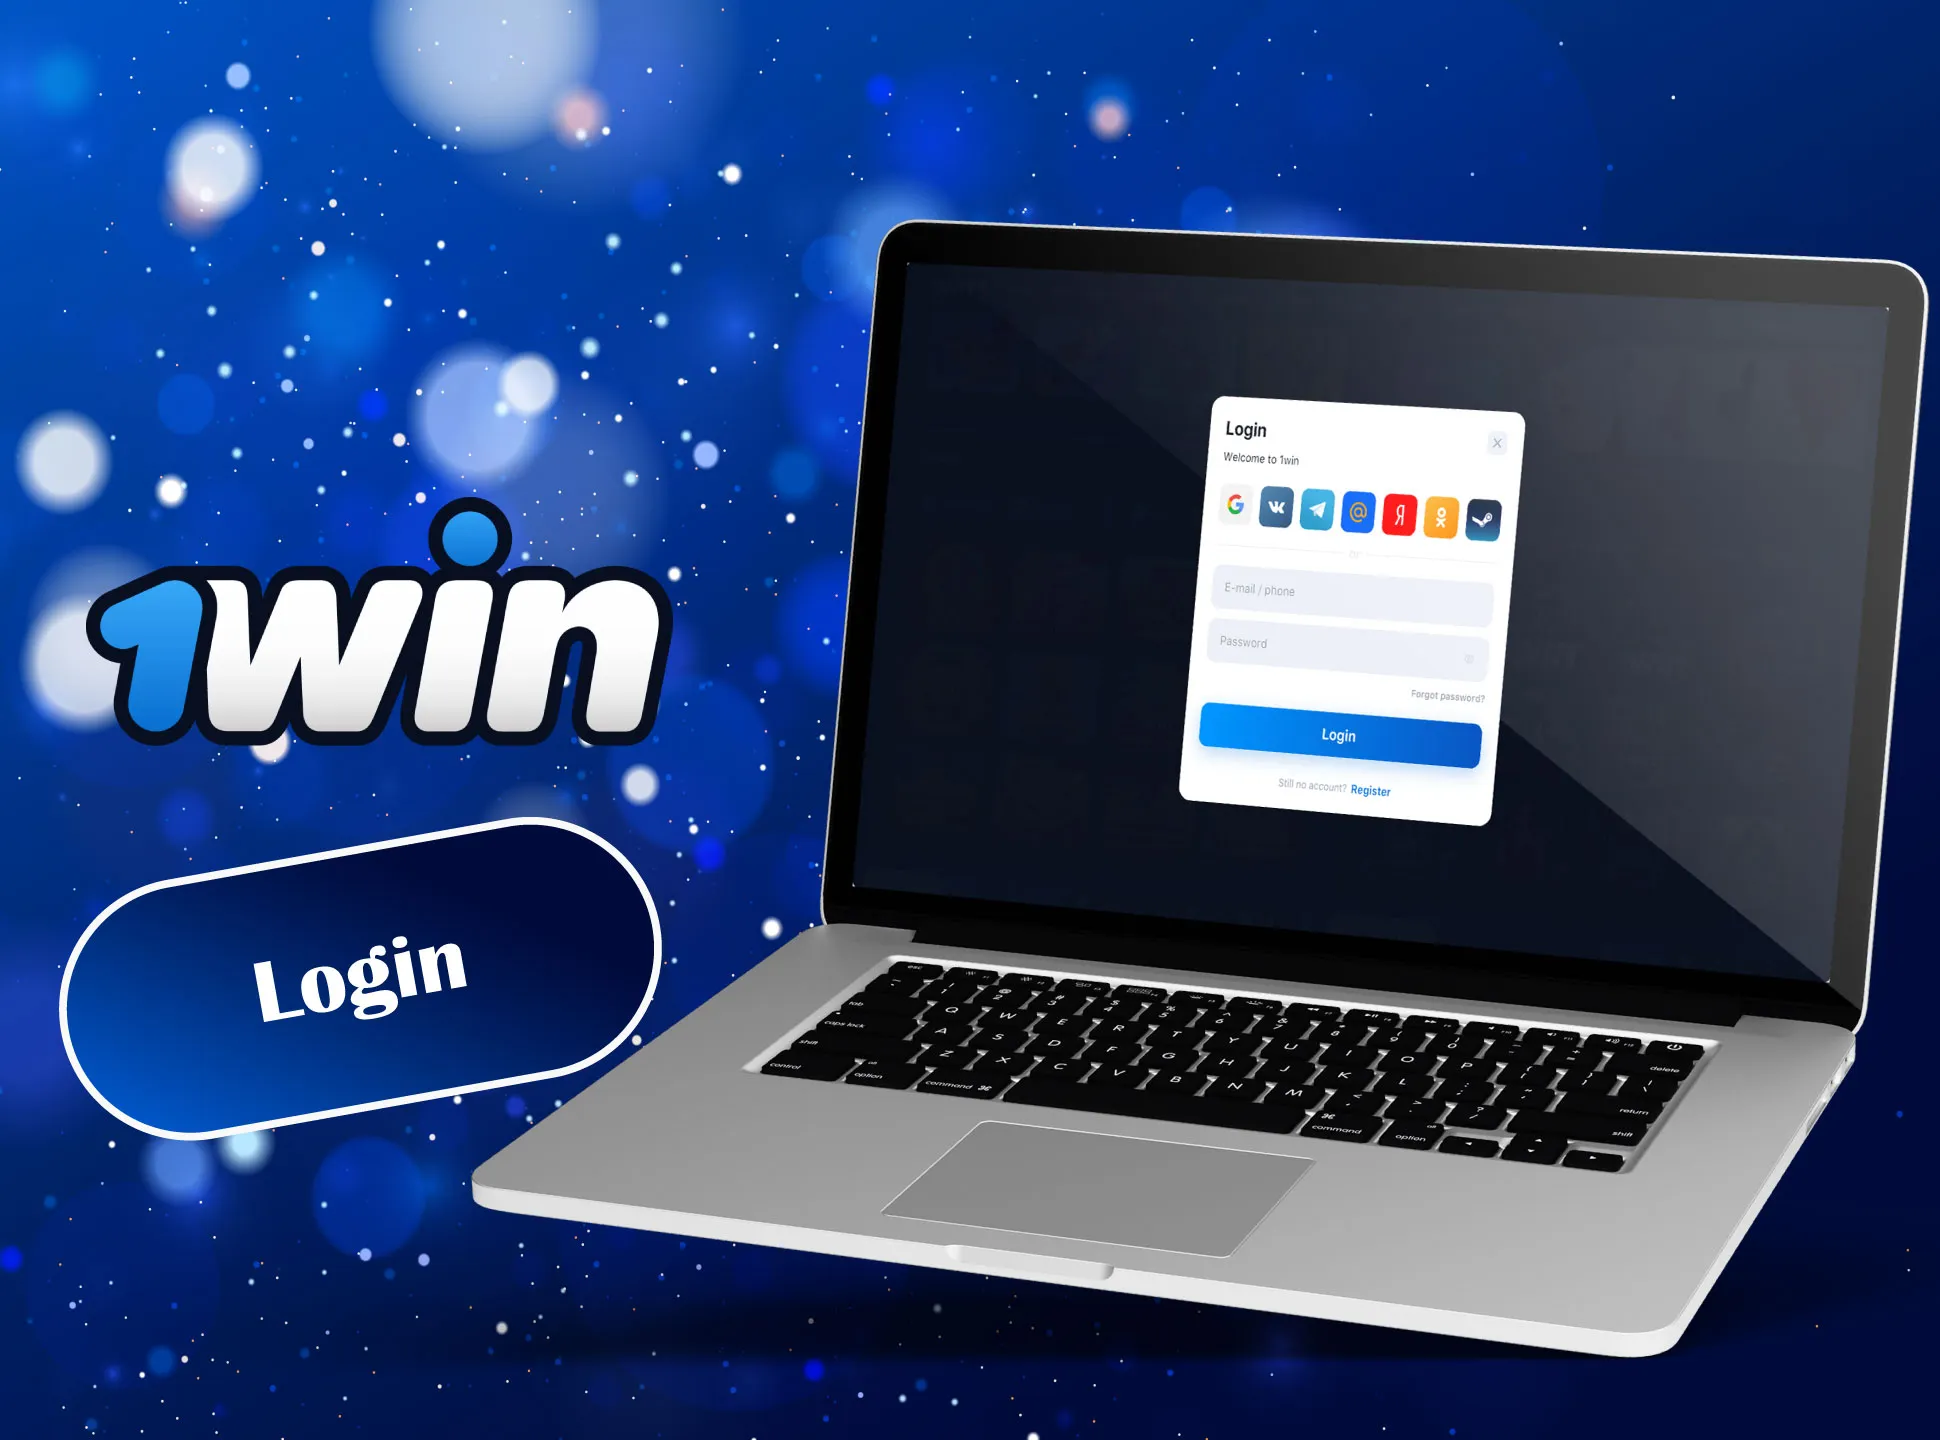 Use your username and password to log in to 1win.